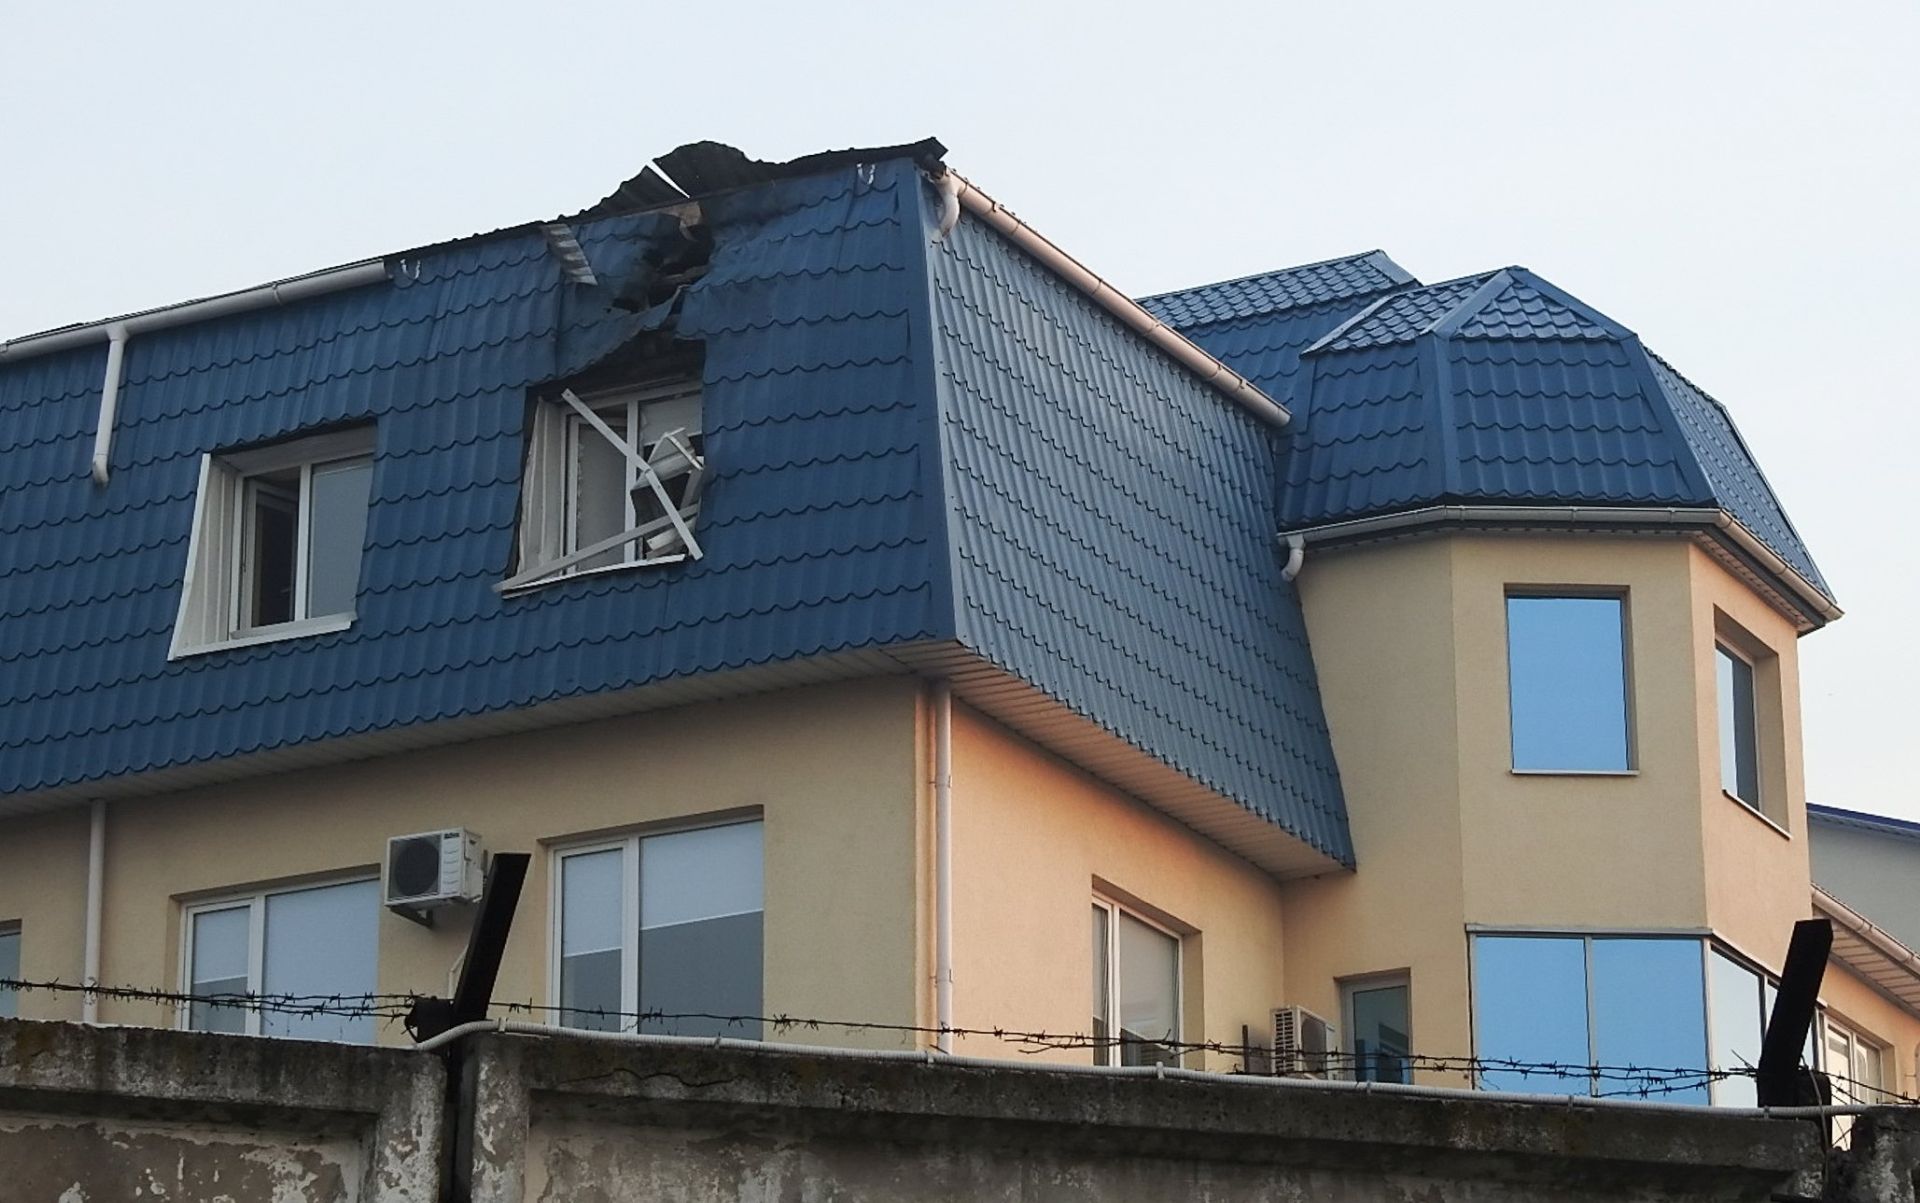 epa05876693 A general view of the roof of Polish Consulate General, which was damaged overnight Wednesday, by an unidentified large caliber weapon in the city of Lutsk, Ukraine, 29 March 2017. The incident was reported by security at around 00:30, and no one got hurt as the damaged part of the building was unoccupied at the time of the attack news agencies report.  EPA/OLENA LIVITSKA